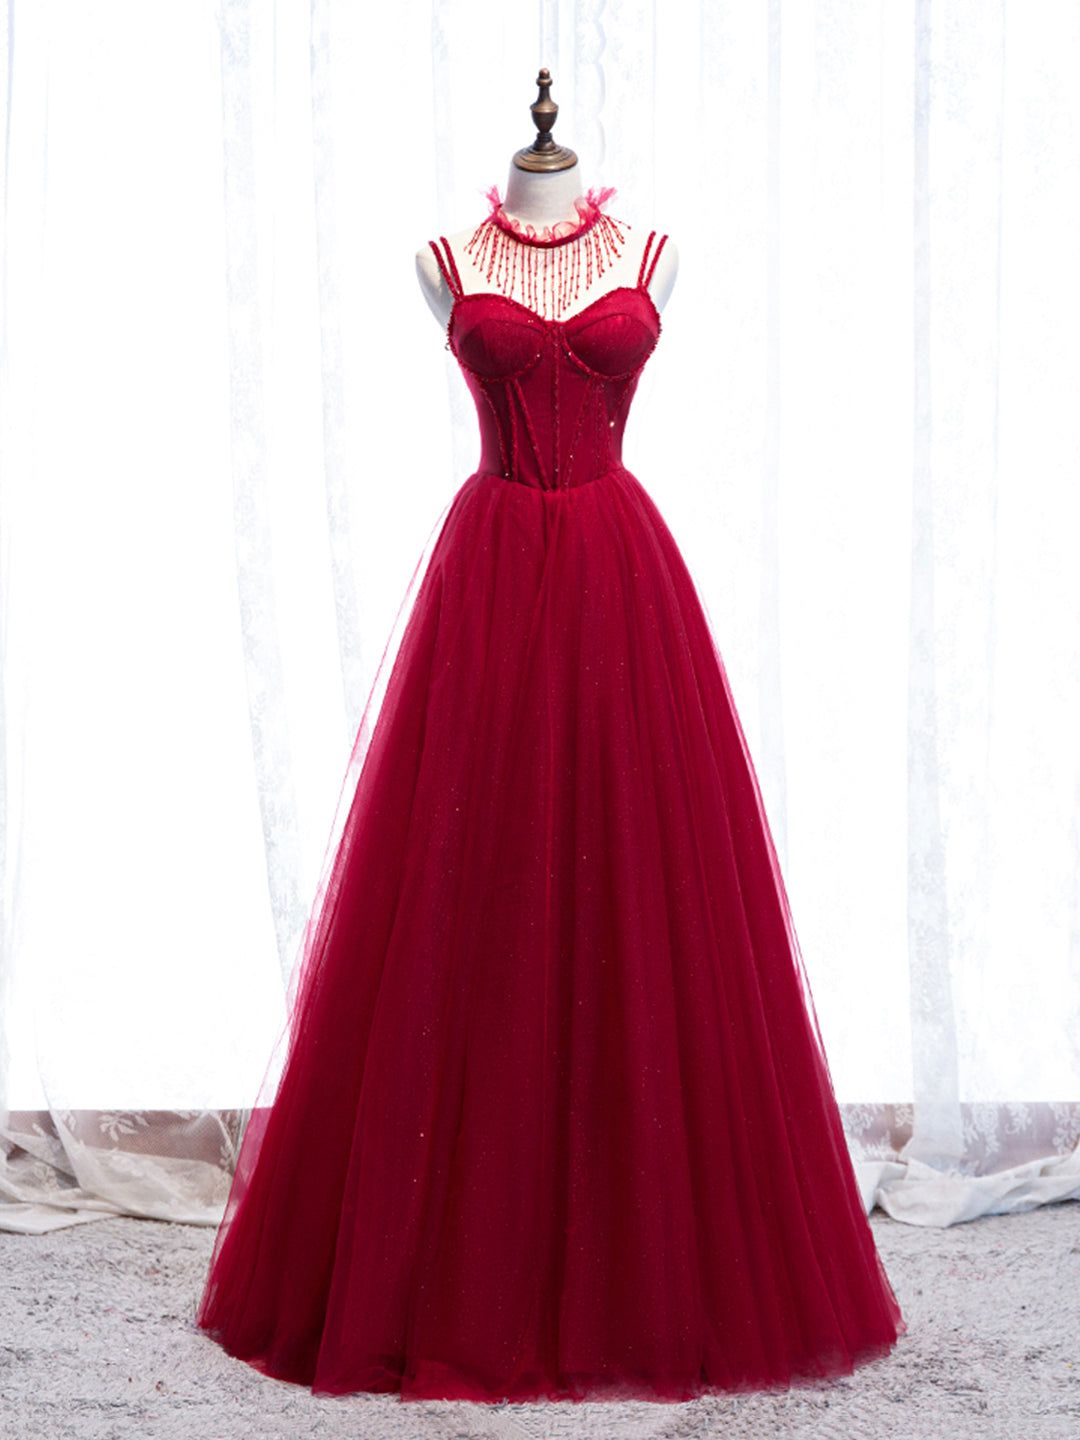 Party Dresses Sale, Red Spaghetti Strap Tulle Party Dress, Red Floor Length Prom Dress